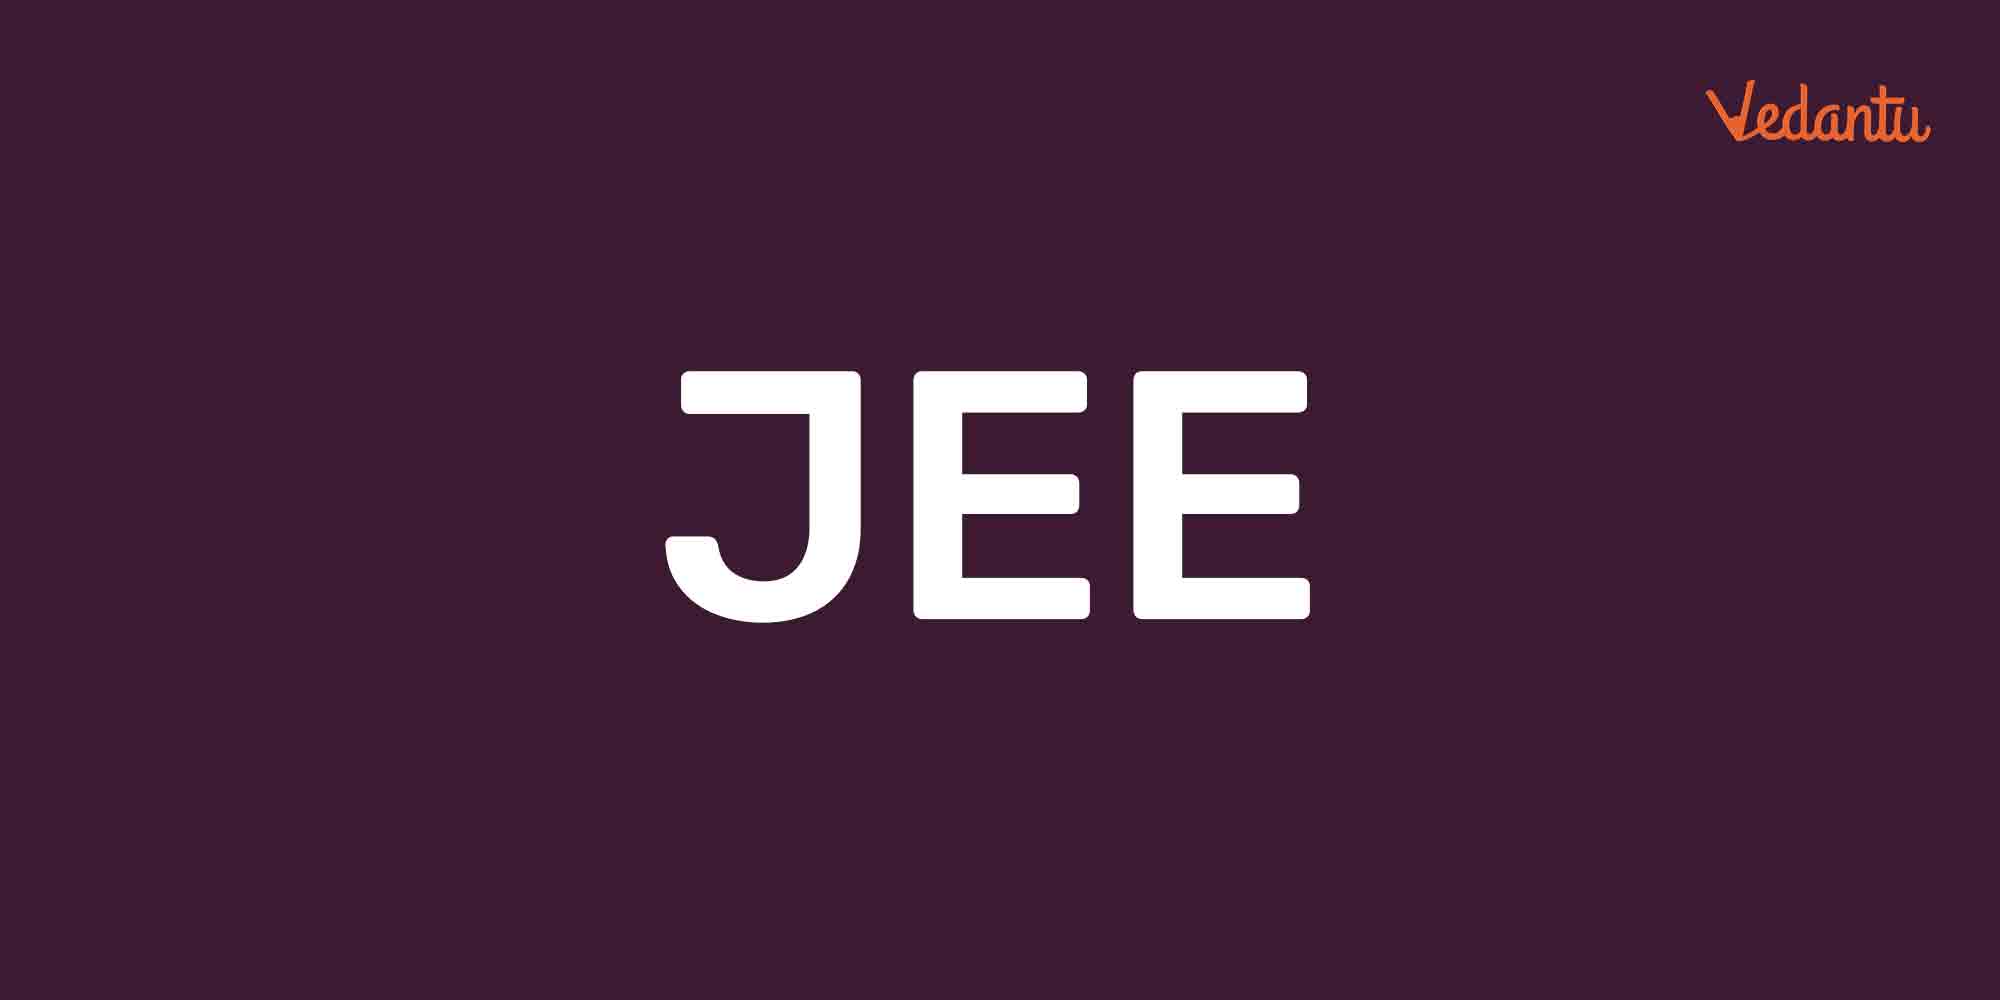 Top Engineering Colleges in India Accepting JEE Mains Scores?